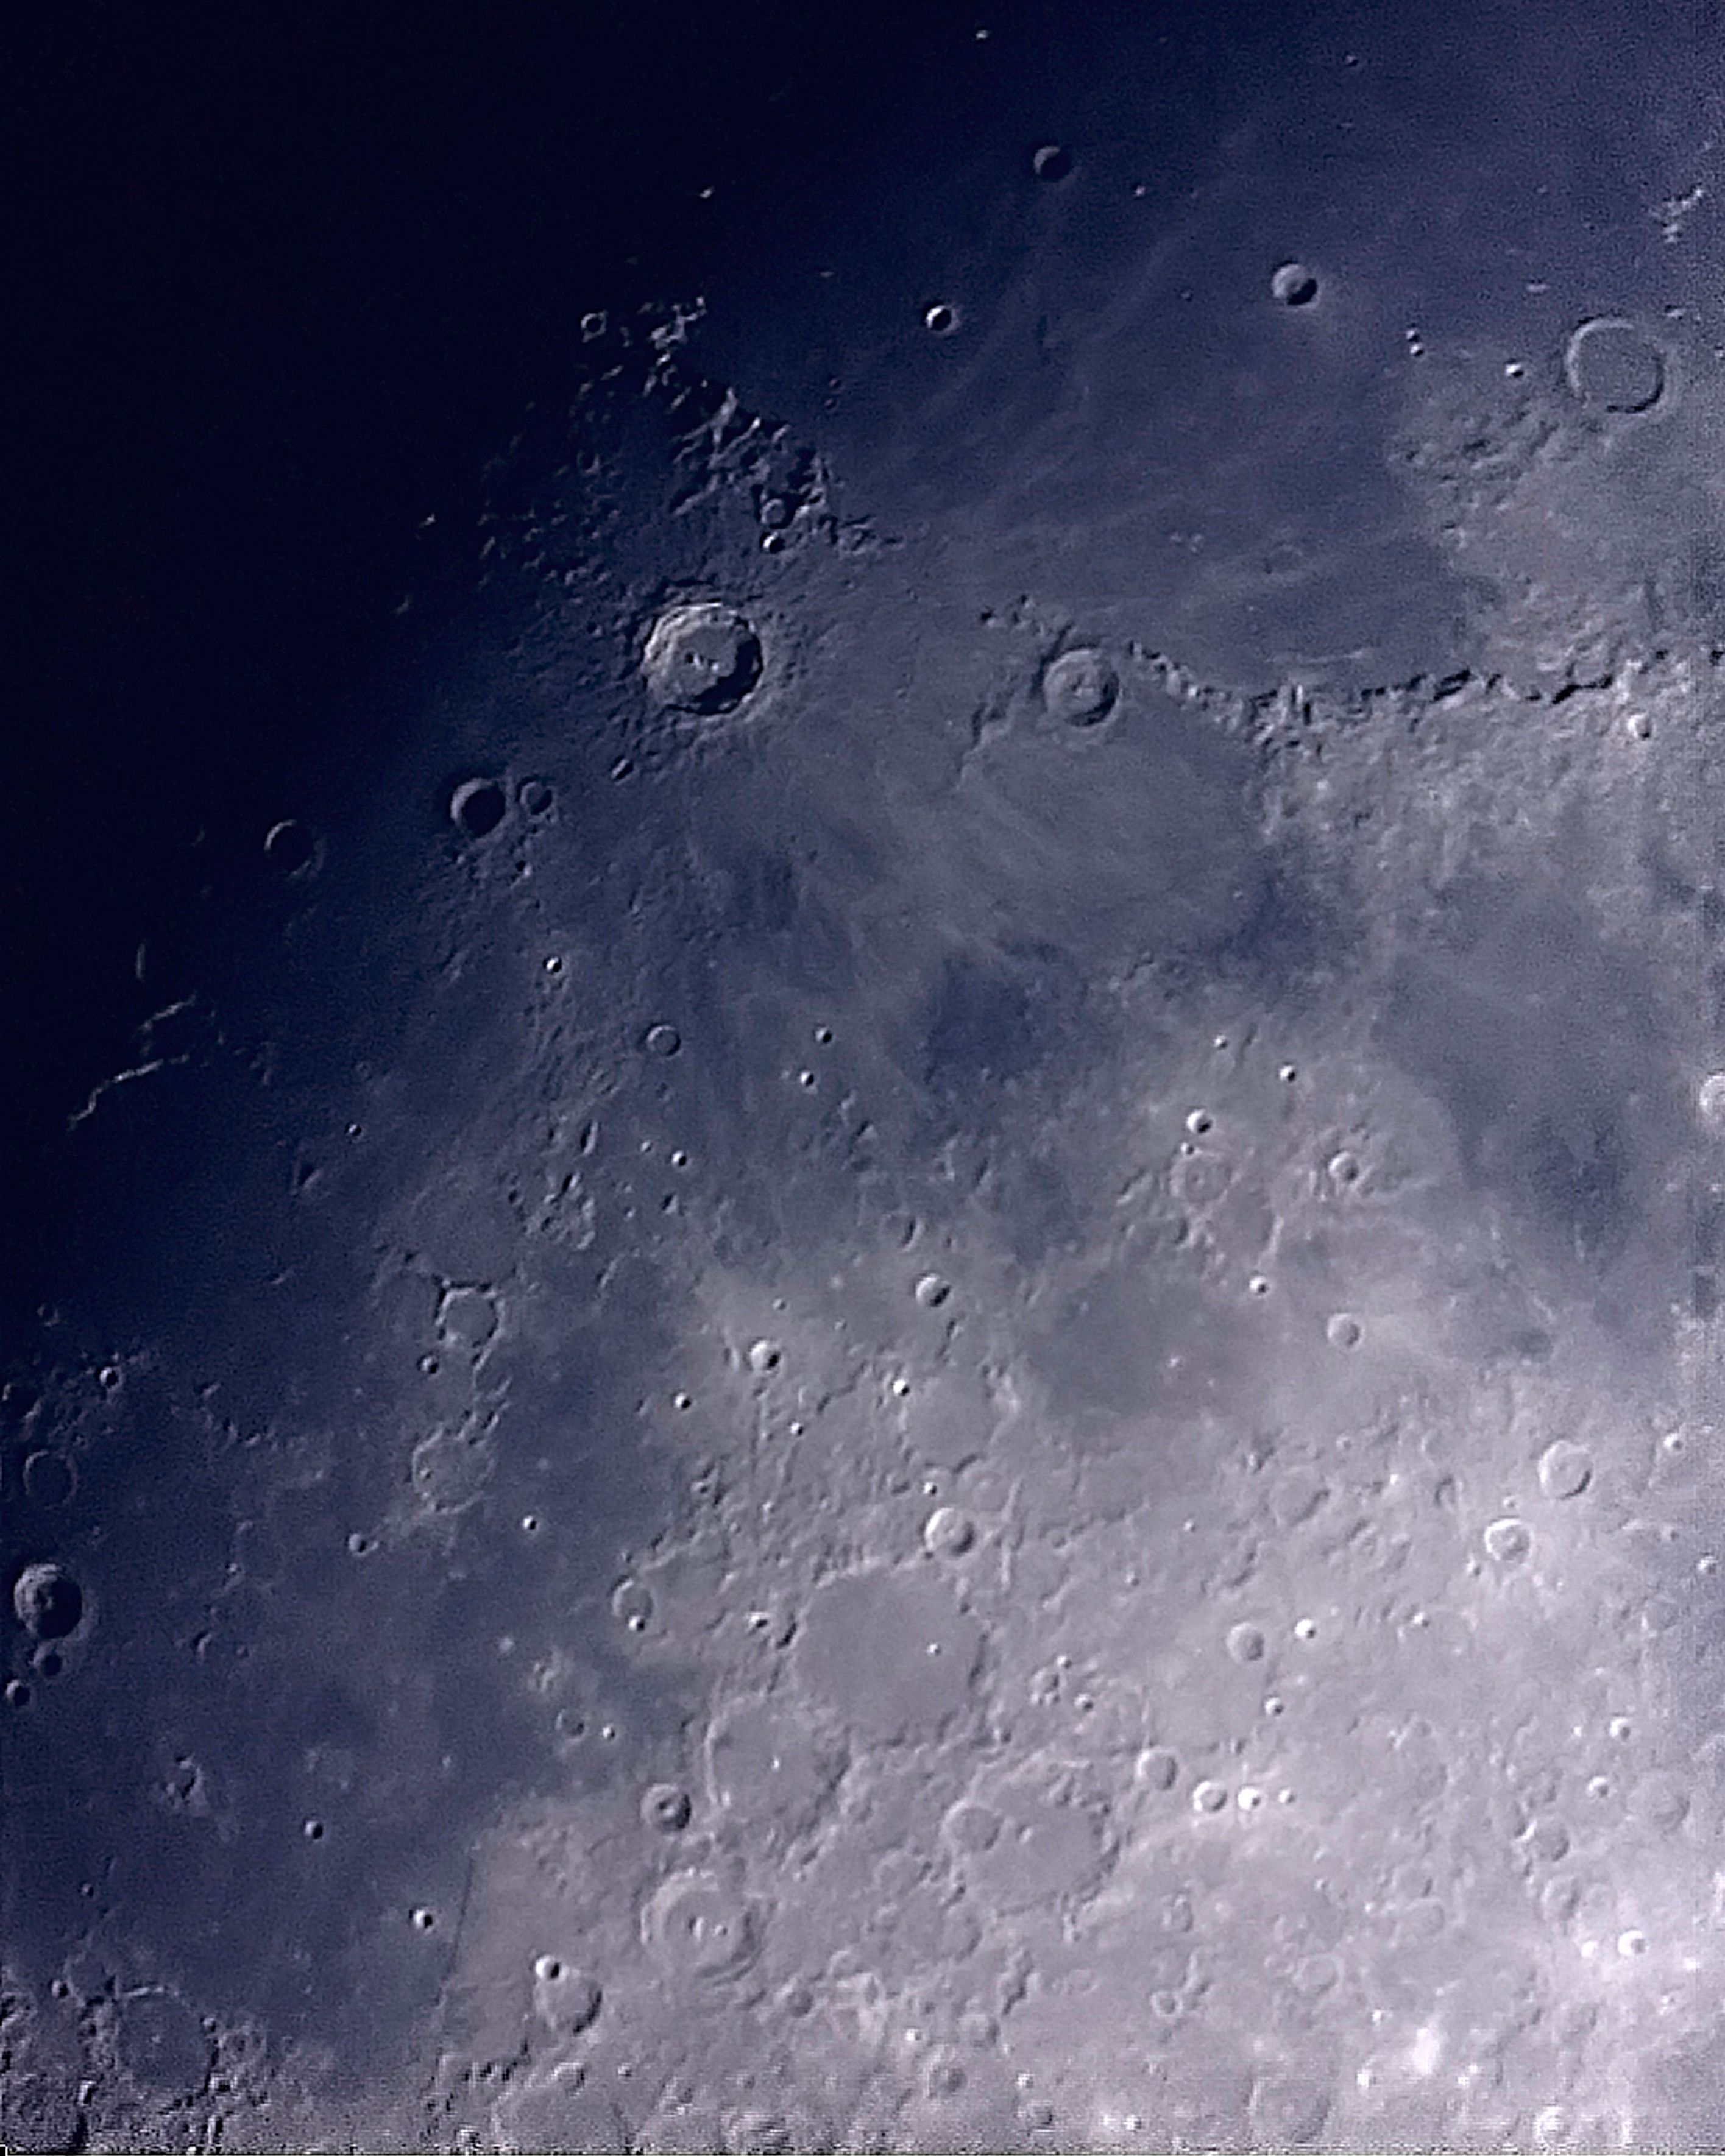 Moon - Crater Copernicus at Orion Store